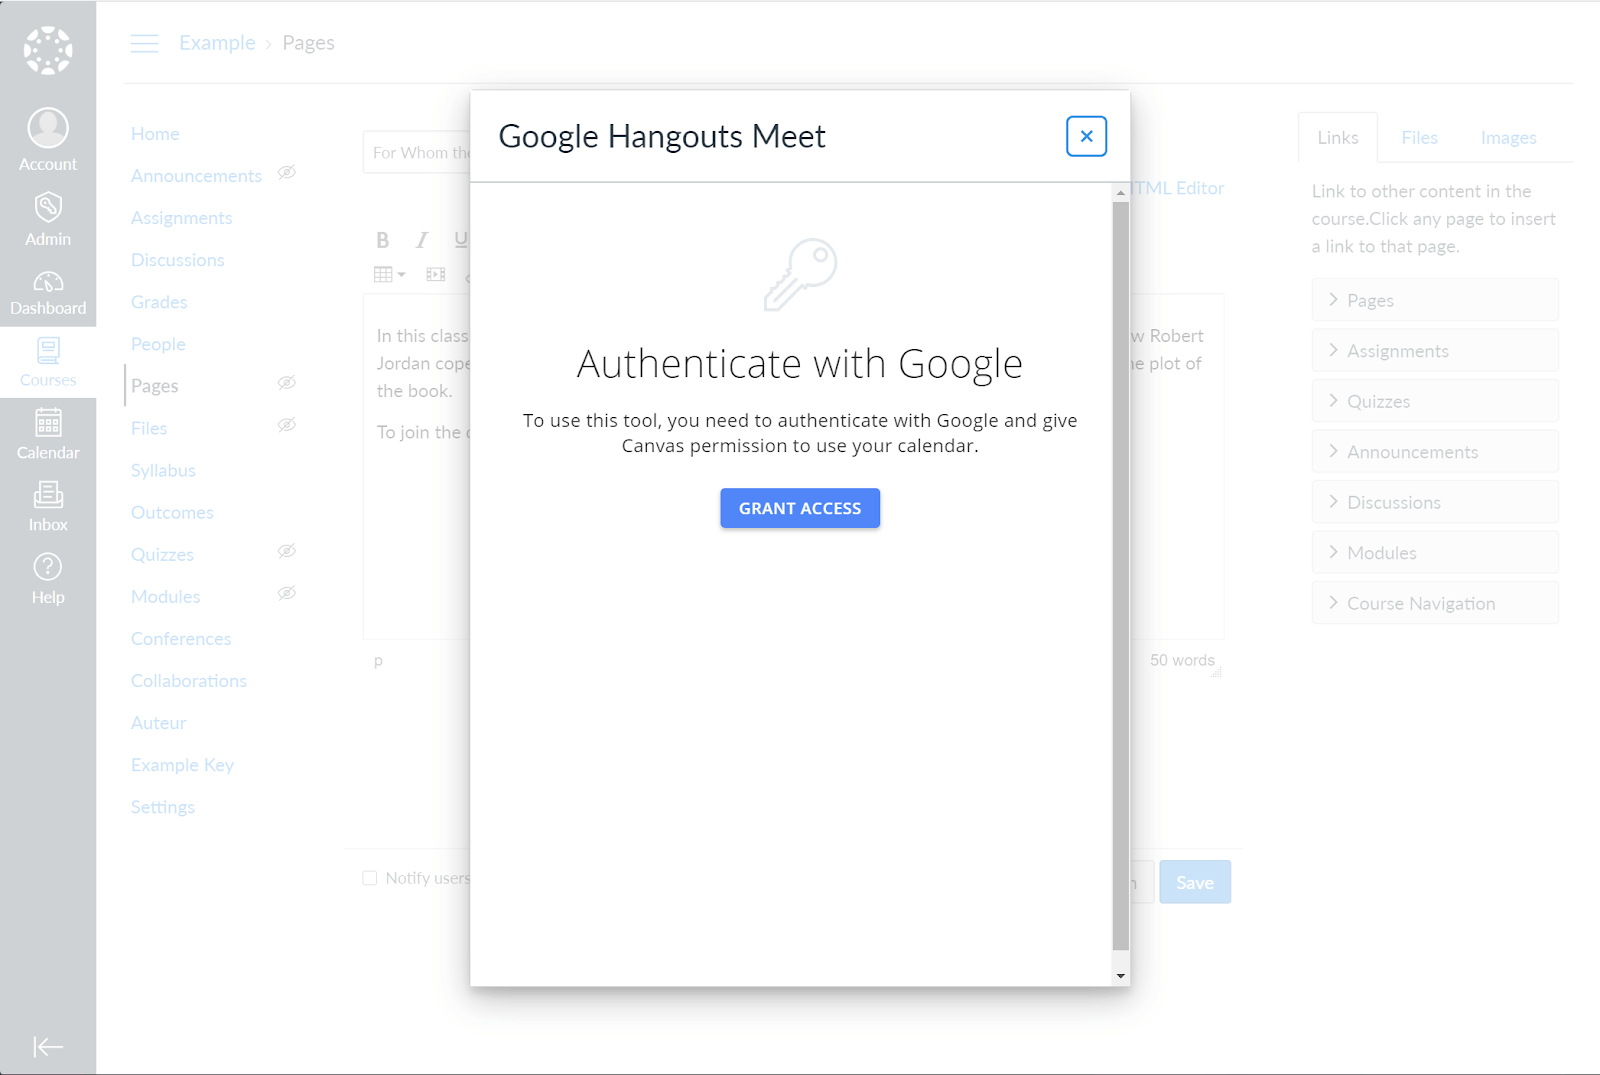 Authenticate with Google Grant Access option